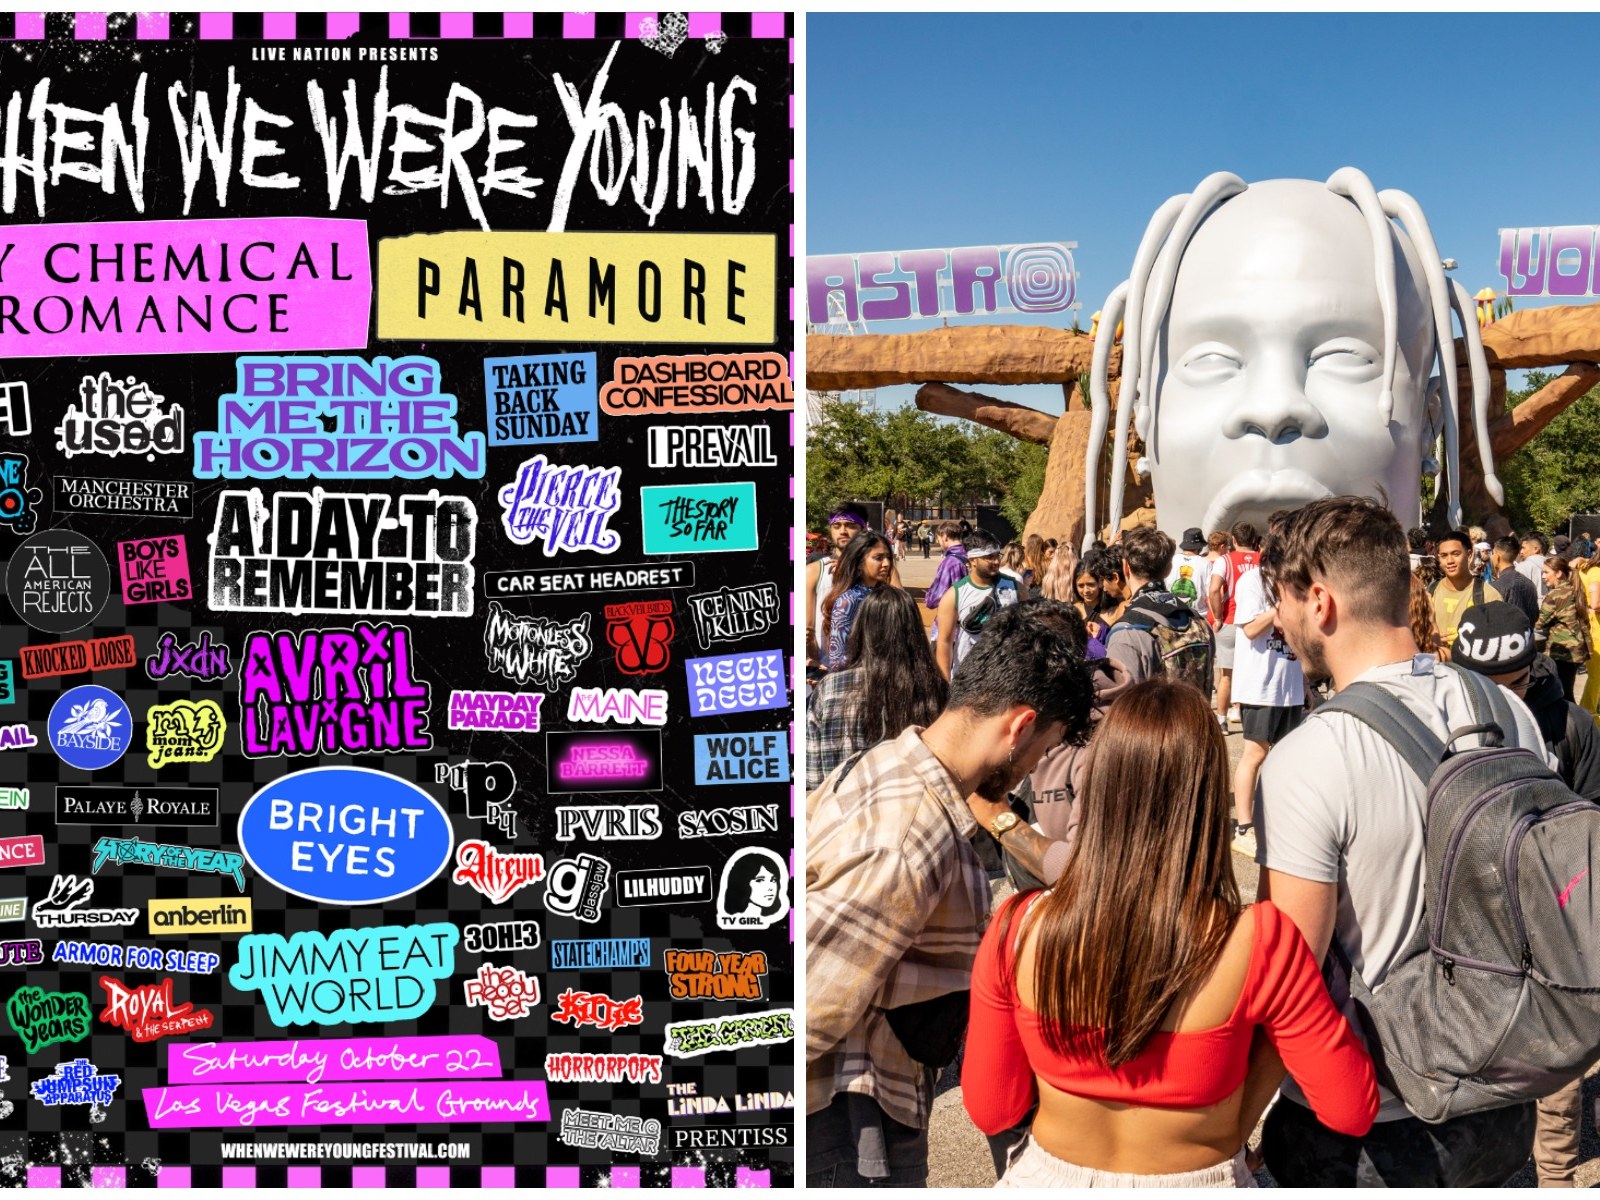 When we were young festival lineup